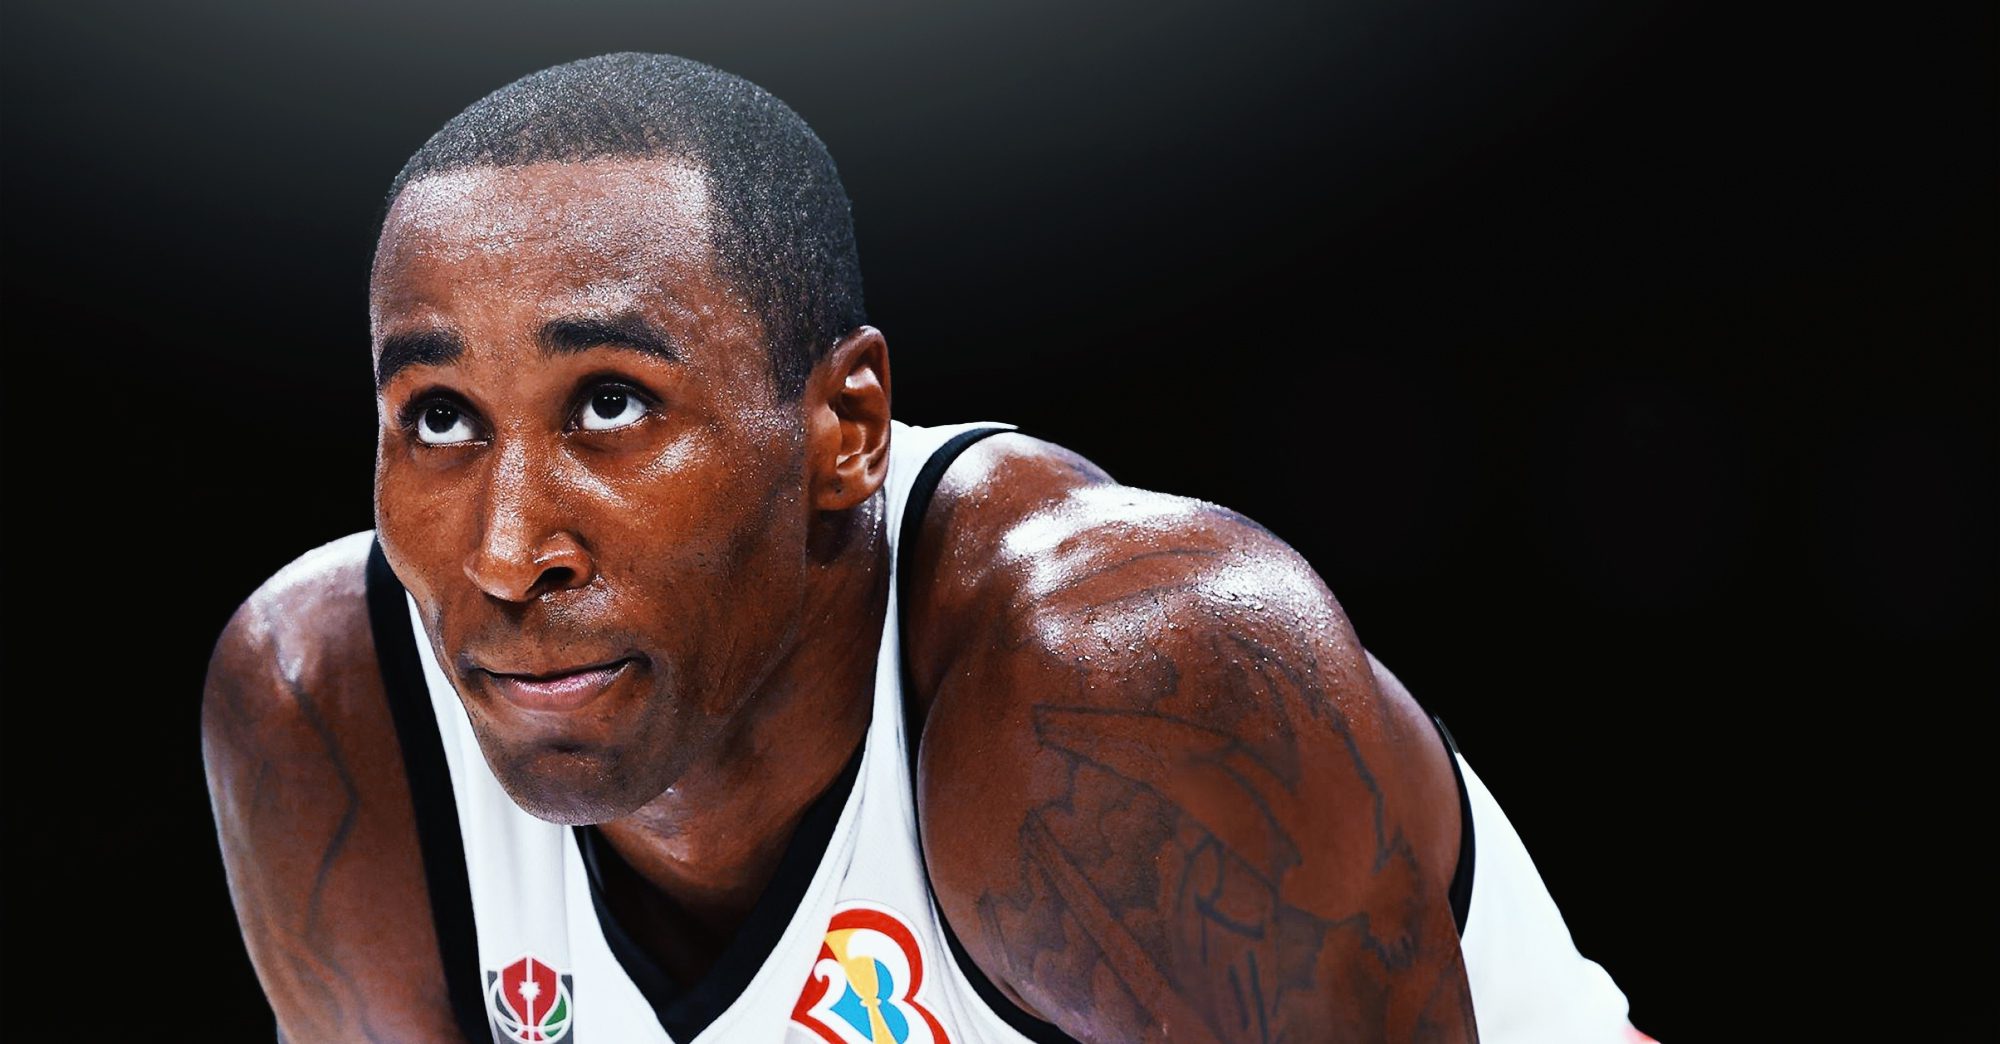 ‘I’ll Sleep in the Gym’: Rondae Hollis-Jefferson Makes Emotional Plea For NBA Opportunity